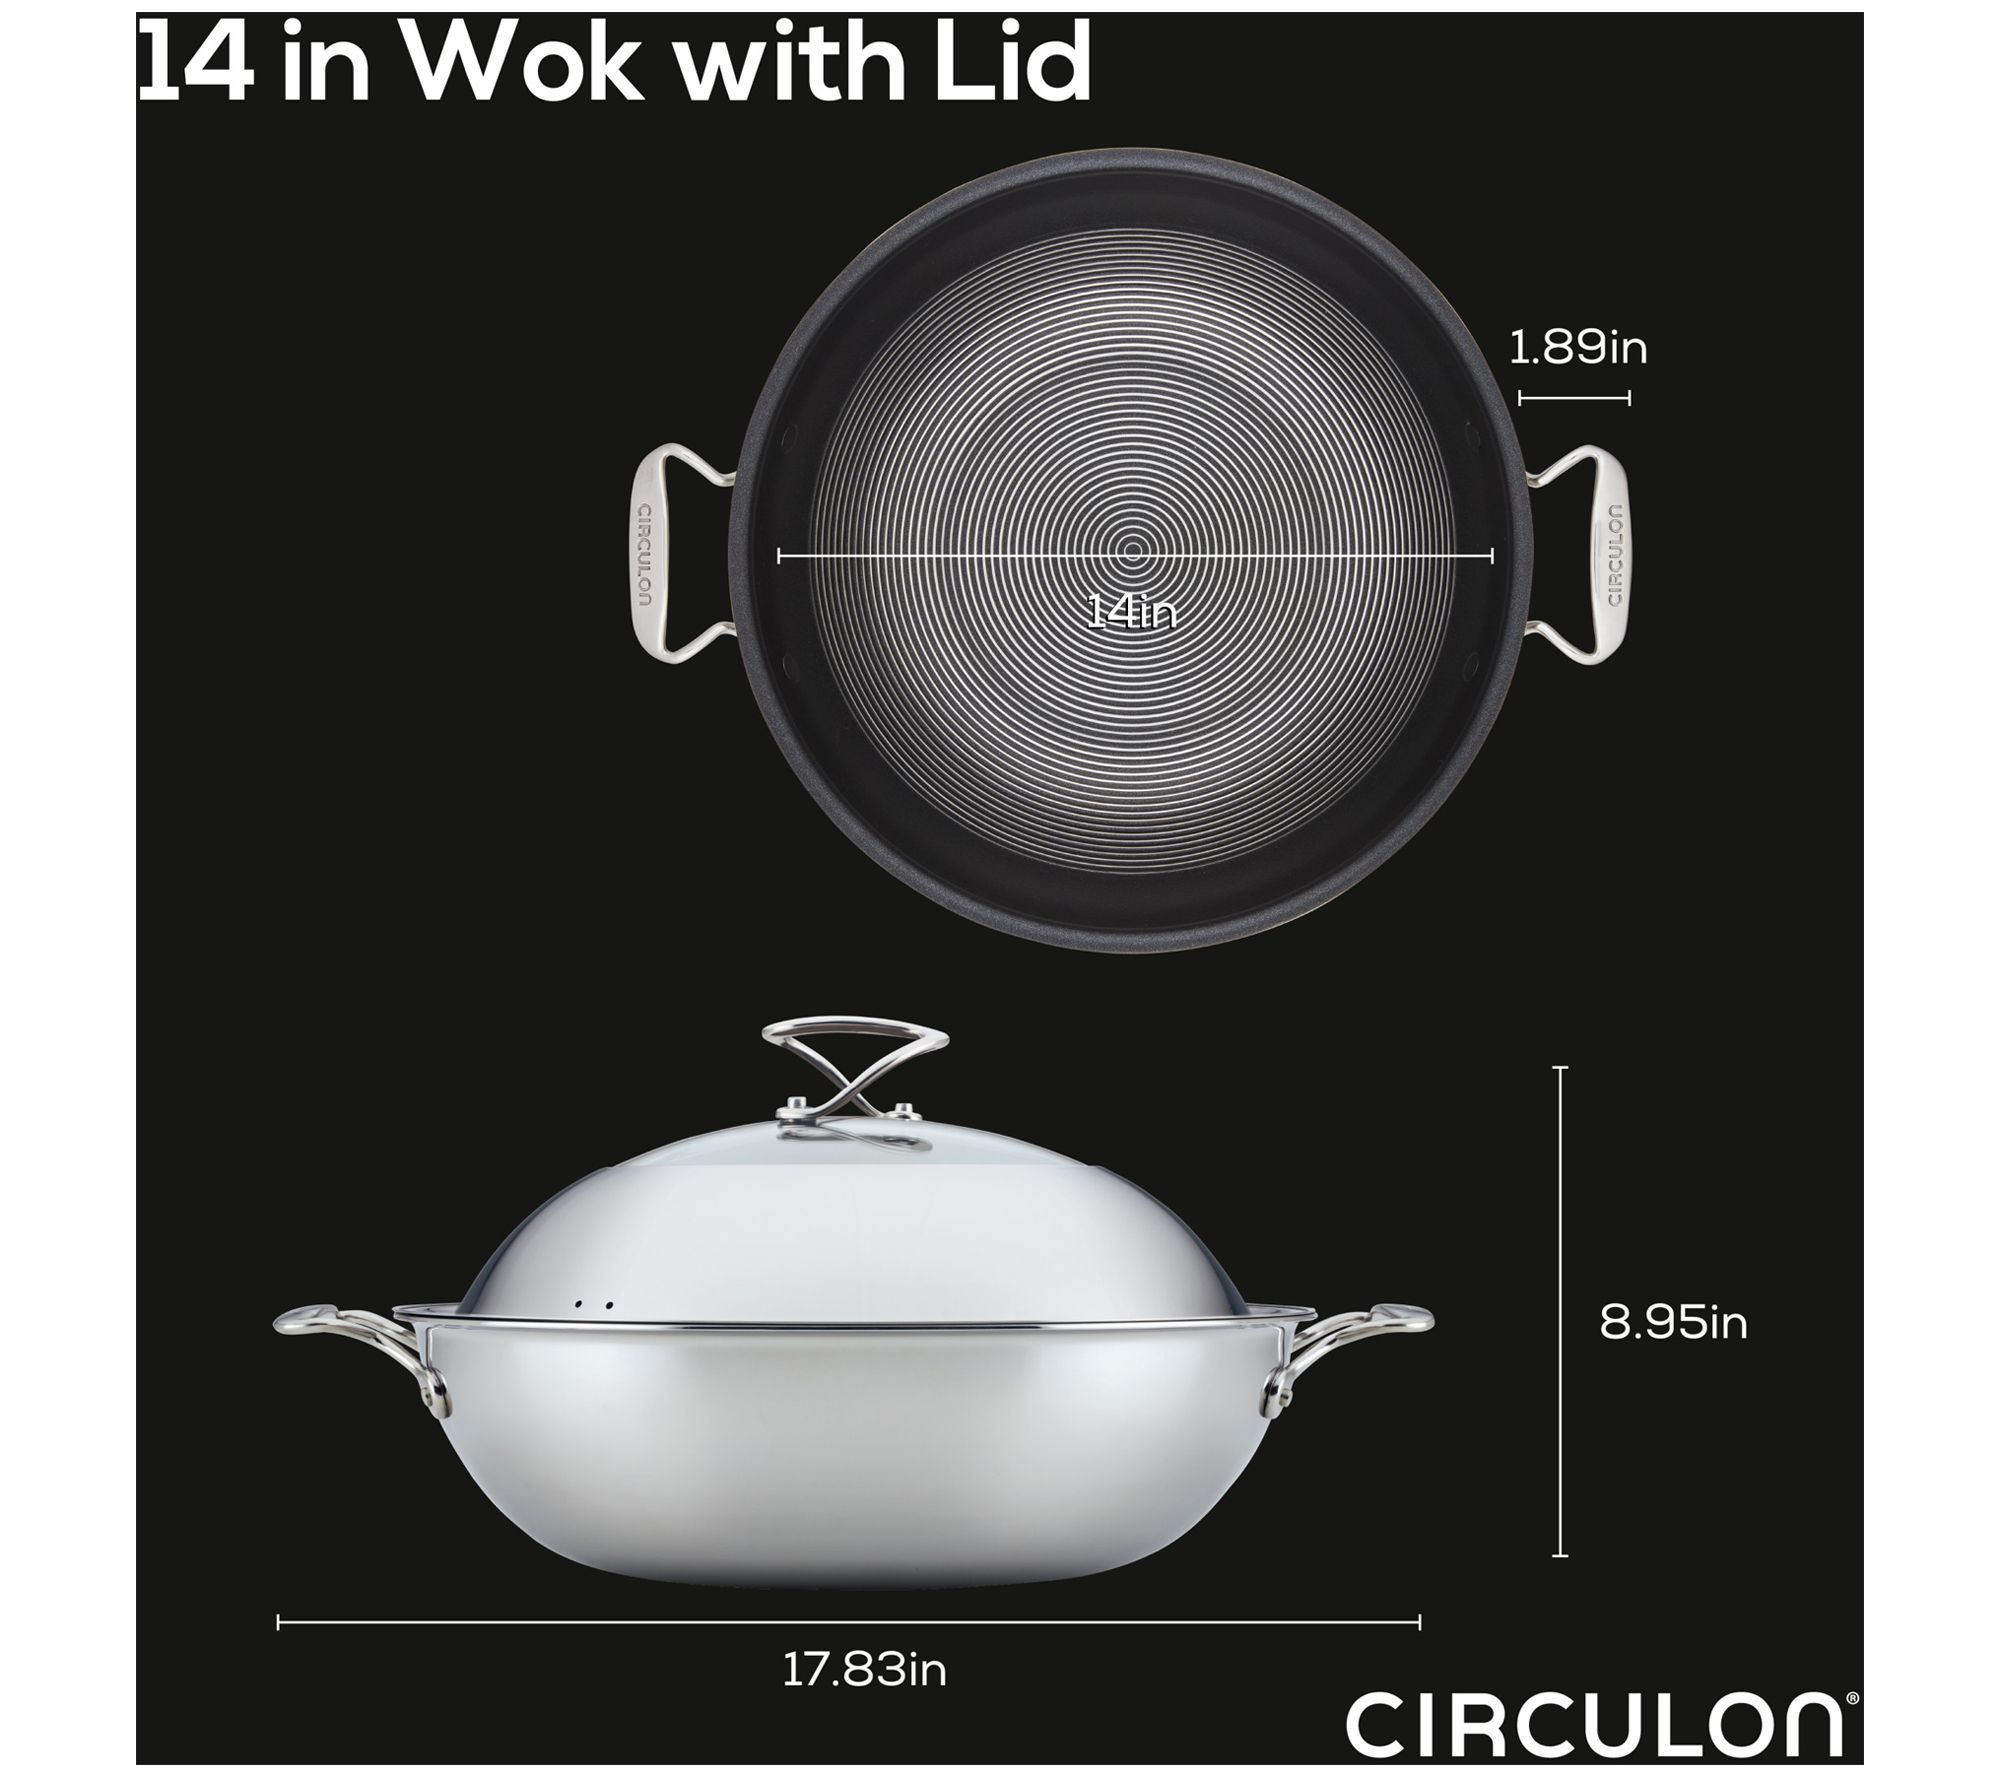 Circulon 12 inch SteelShield Nonstick Stainless Steel S-Series Frying Pan with Lid, Silver